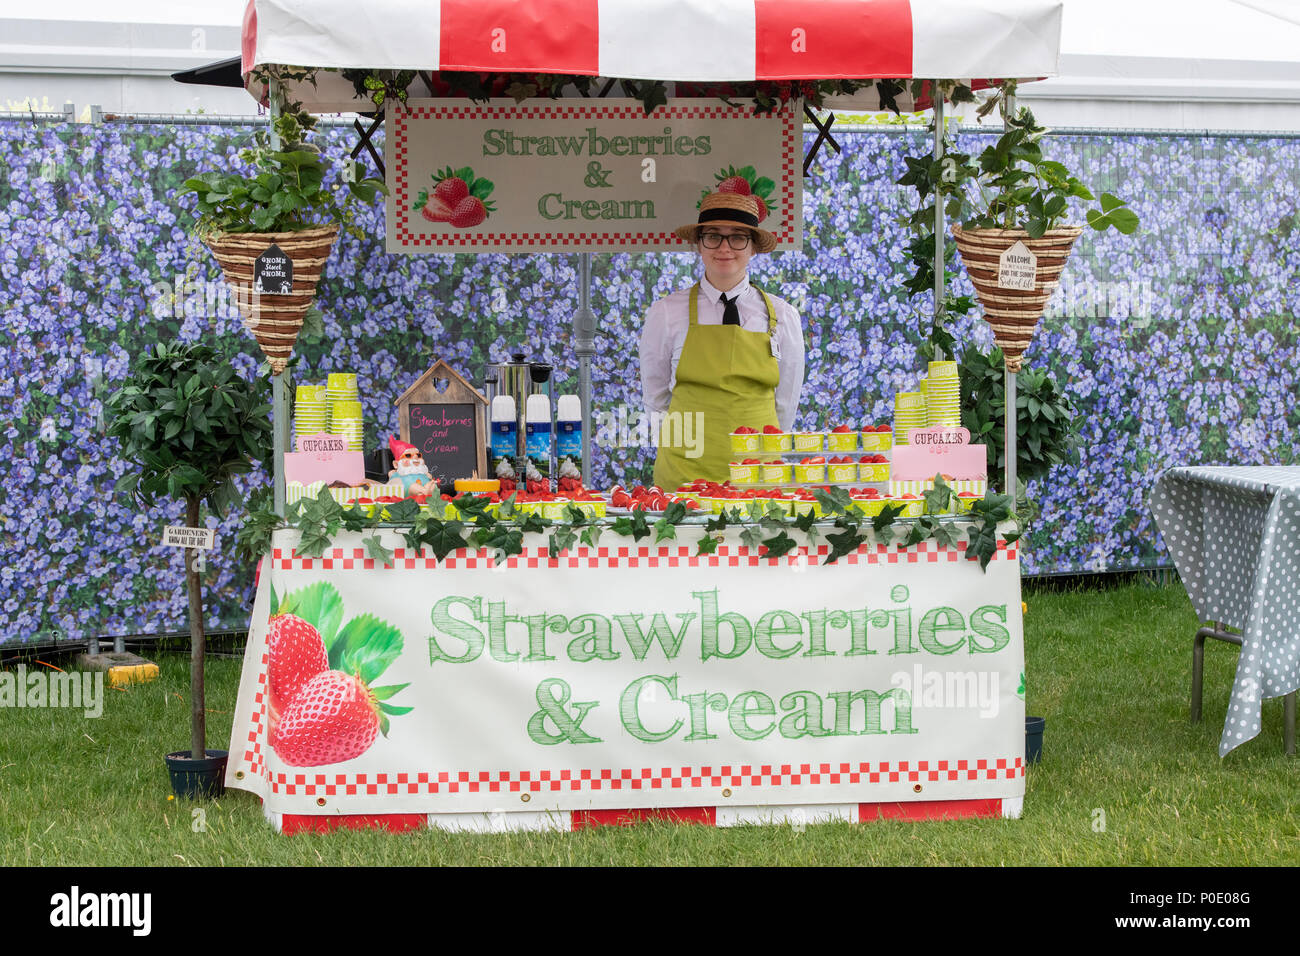 Strawberries and cream food stall at RHS Chatsworth flower show 2018. Chatsworth, Bakewell, Derbyshire, UK Stock Photo